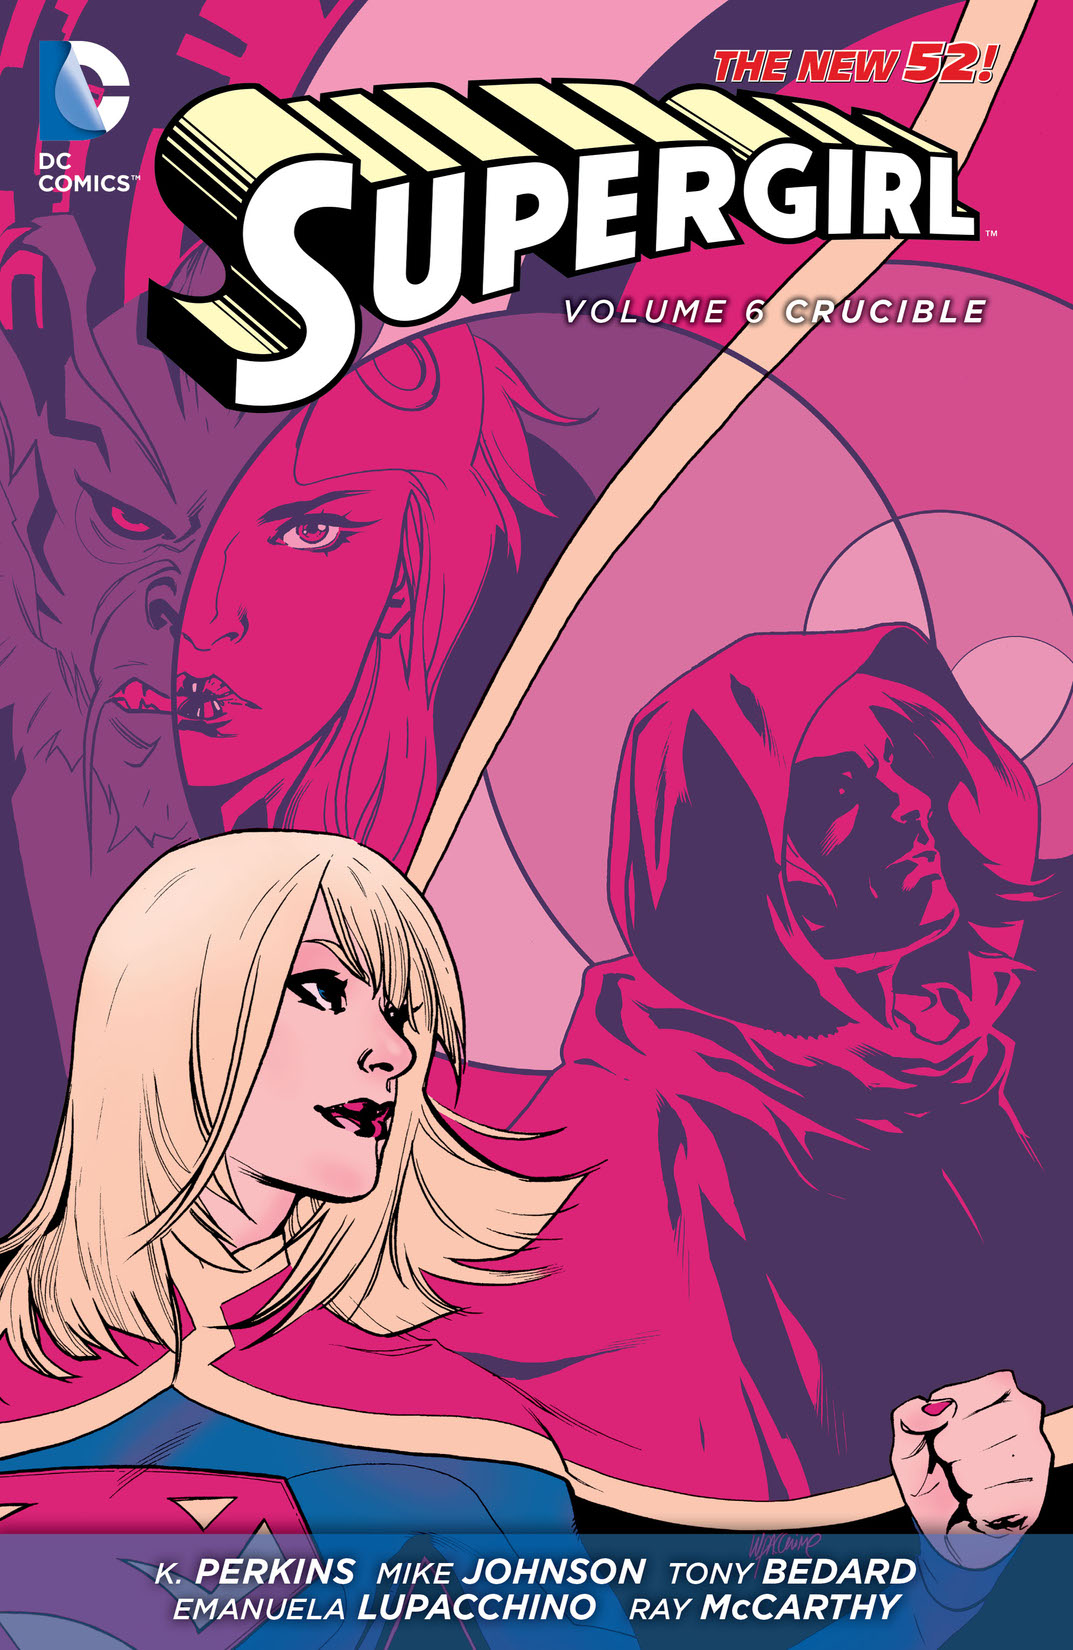 Supergirl Vol. 6: Crucible preview images